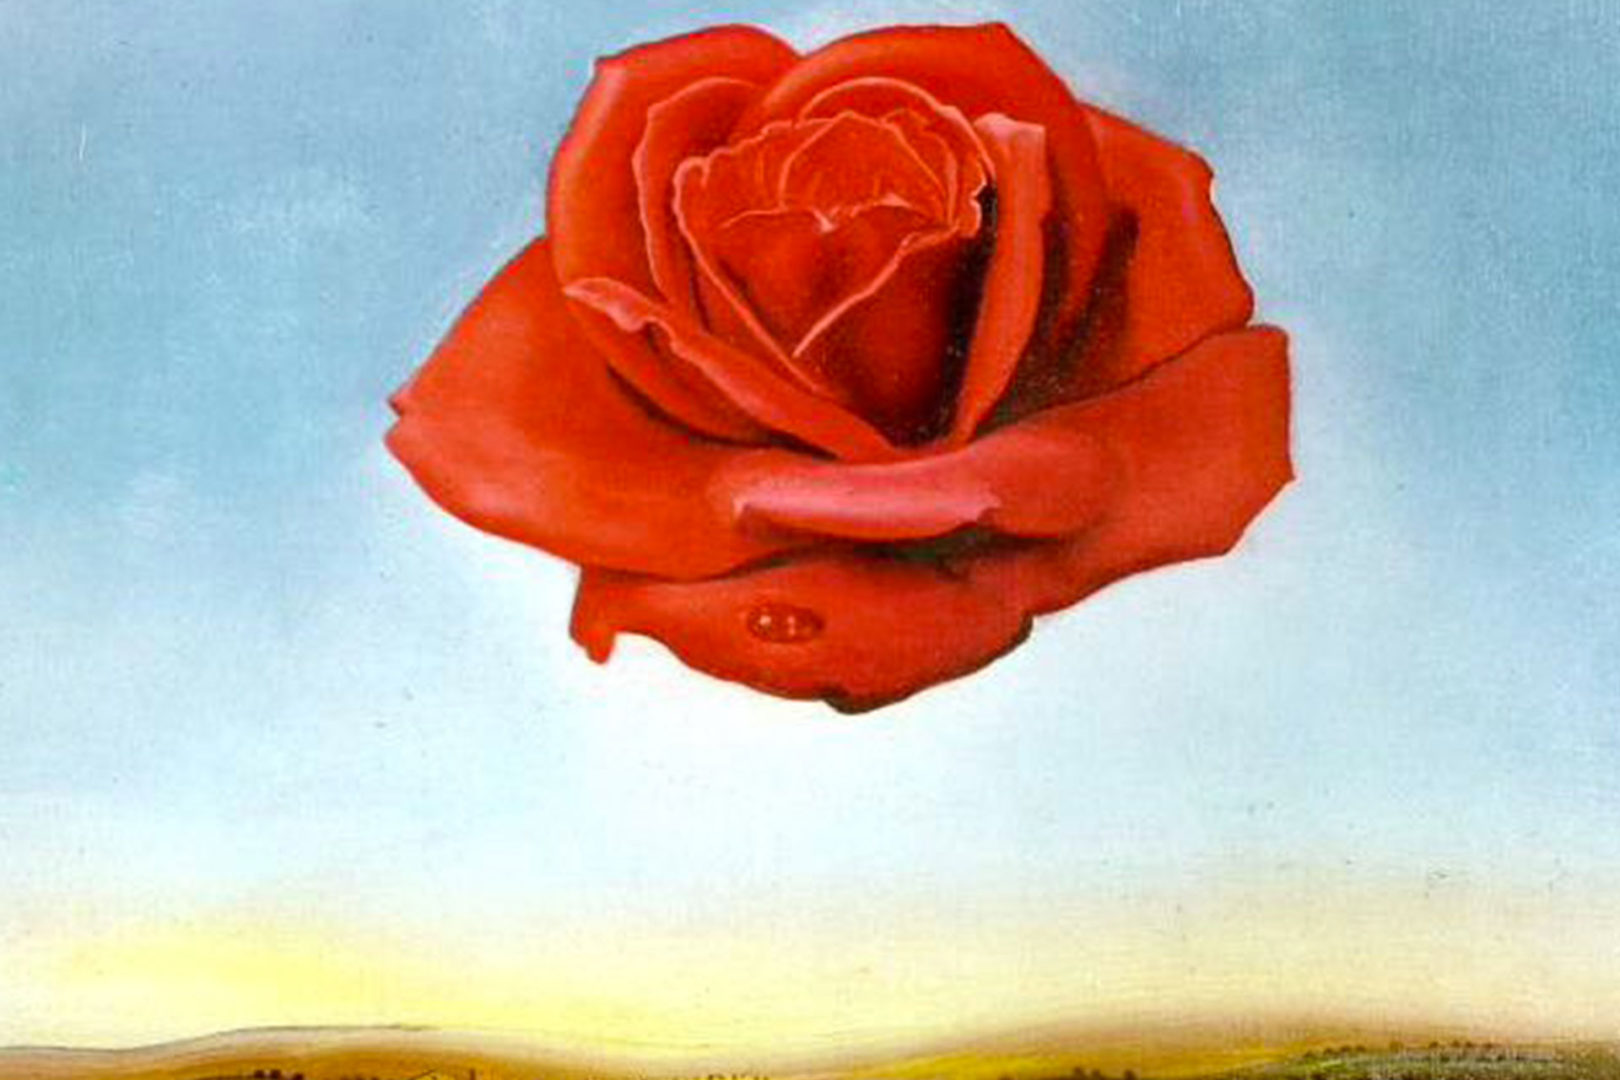 Lampoon, The meditative rose painted by Dalì